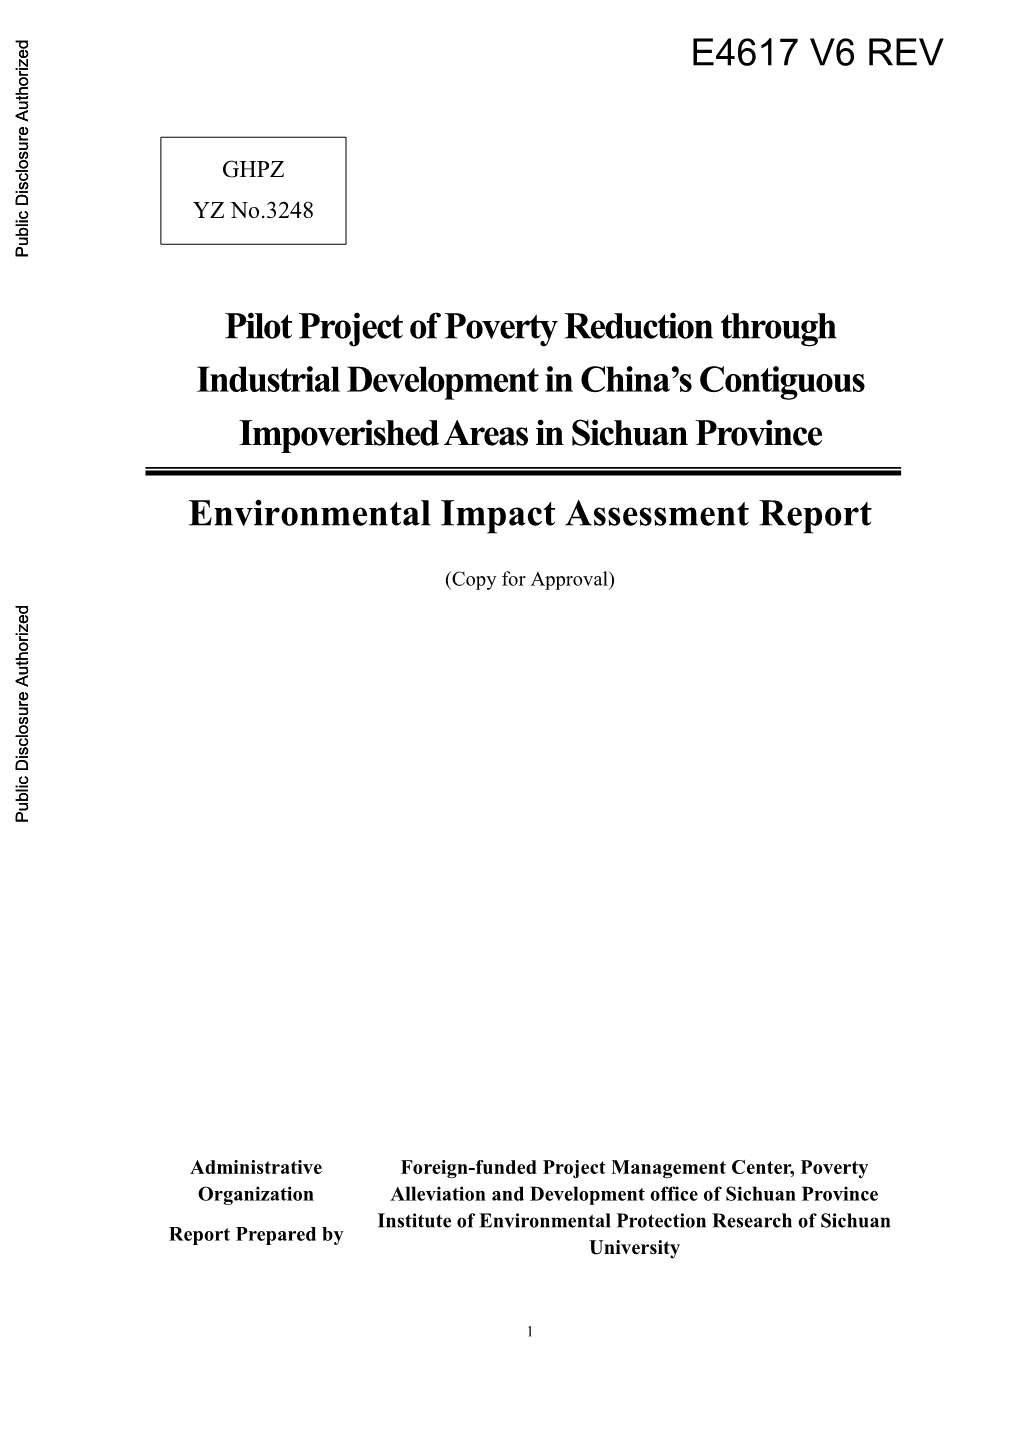 Pilot Project of Poverty Reduction Through Industrial Development in China’S Contiguous Impoverished Areas in Sichuan Province